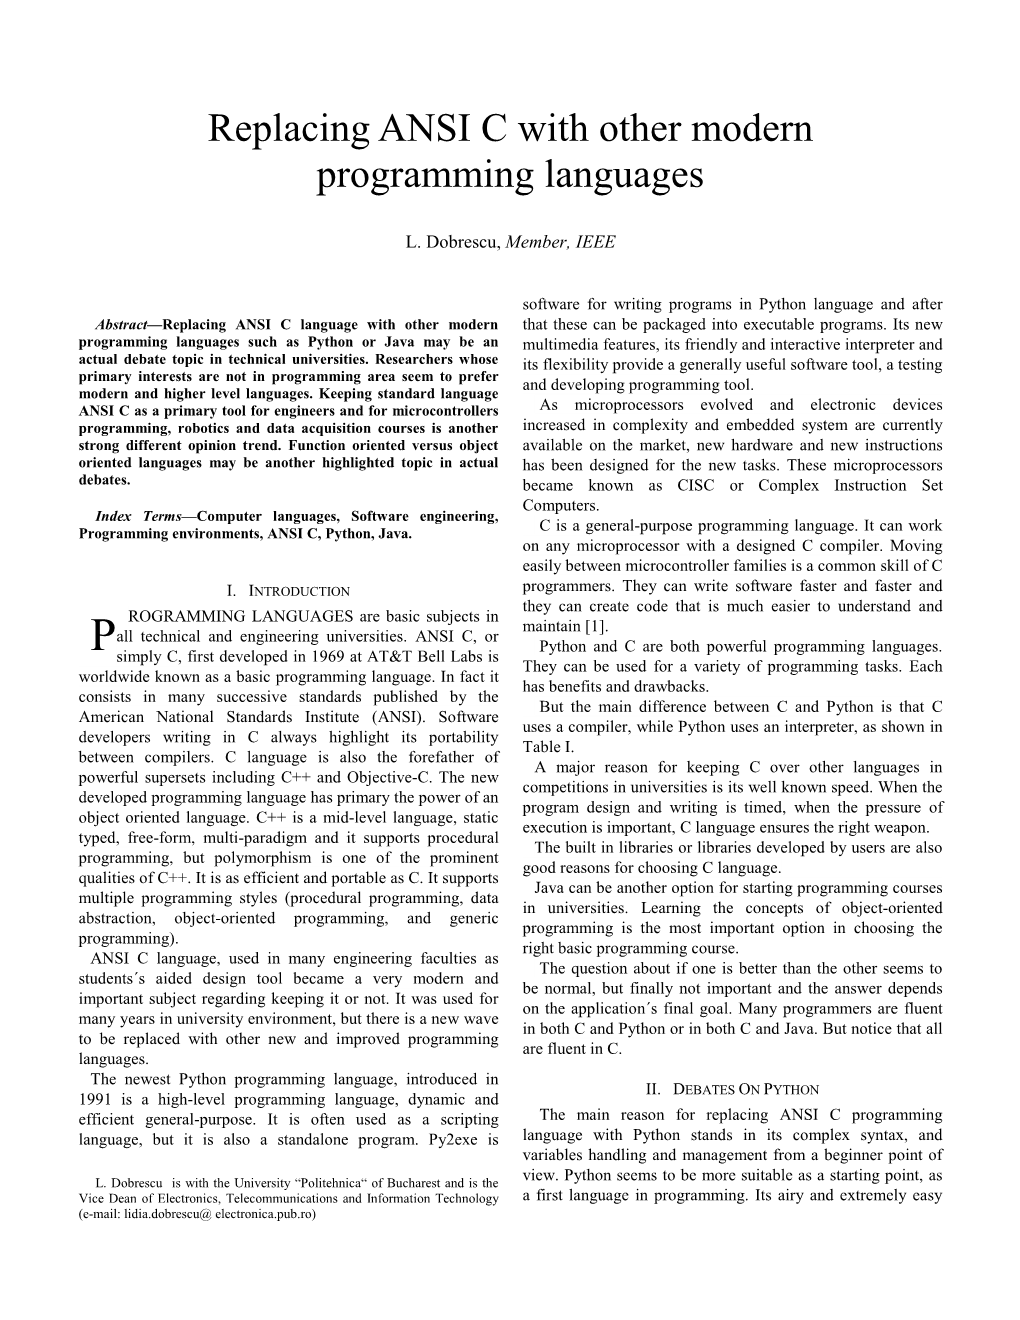 Replacing ANSI C with Other Modern Programming Languages